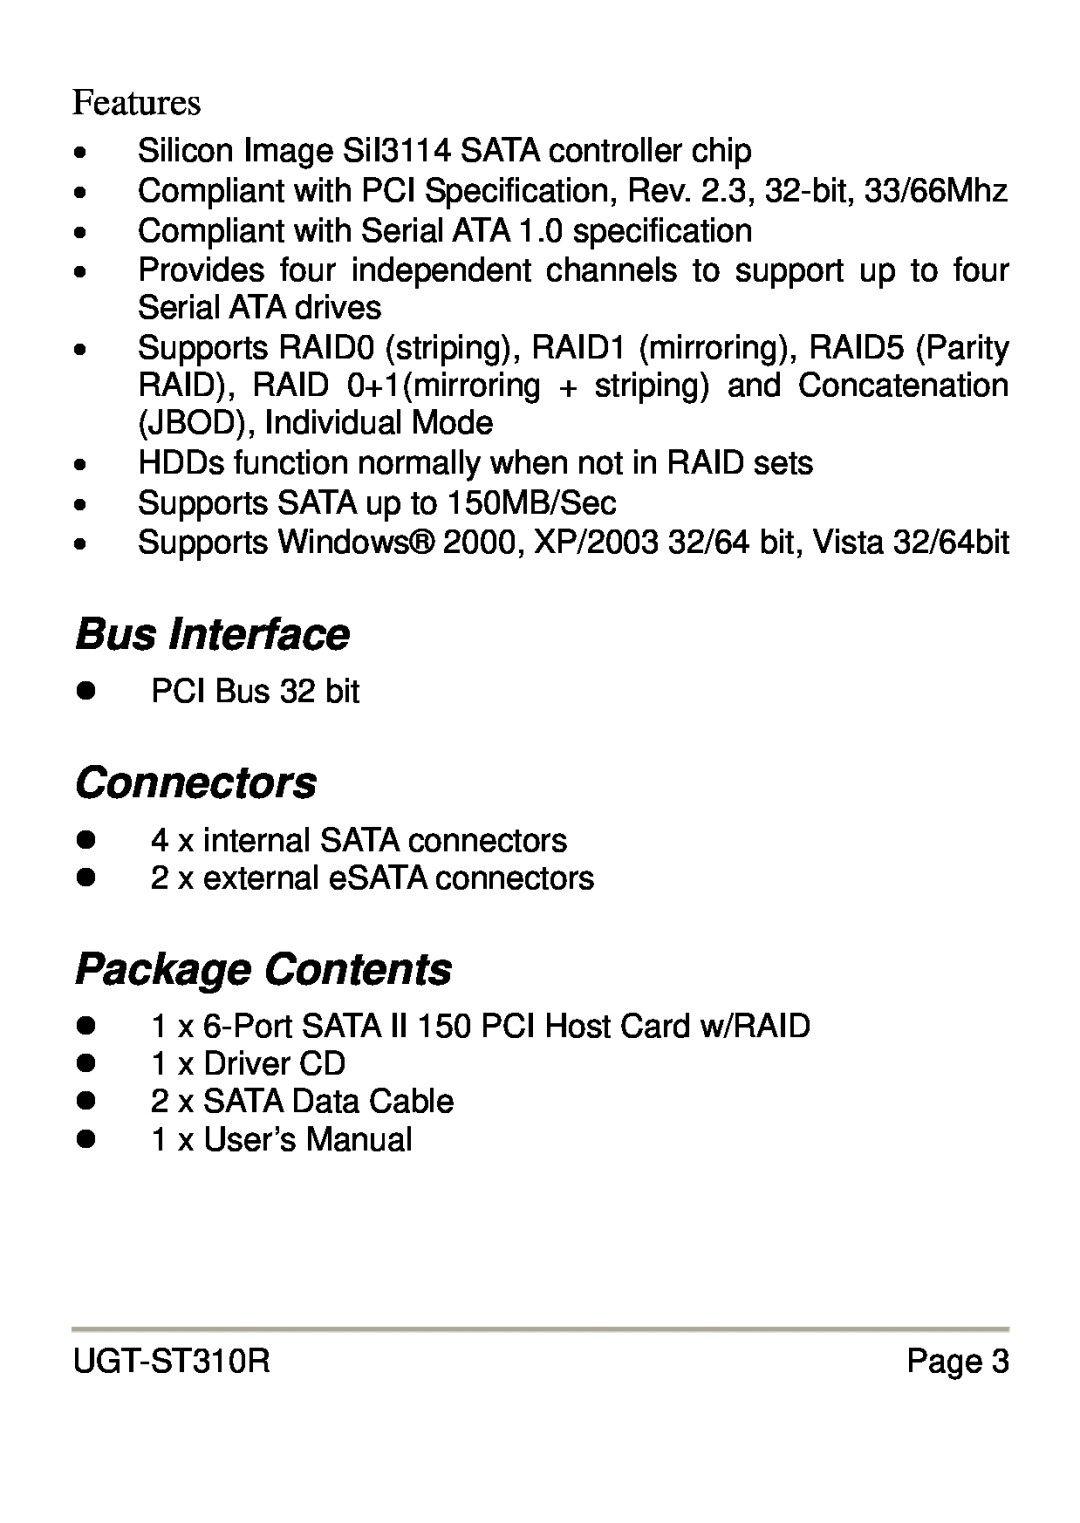 Vantec UGT-ST310R user manual Bus Interface, Connectors, Package Contents, Features 